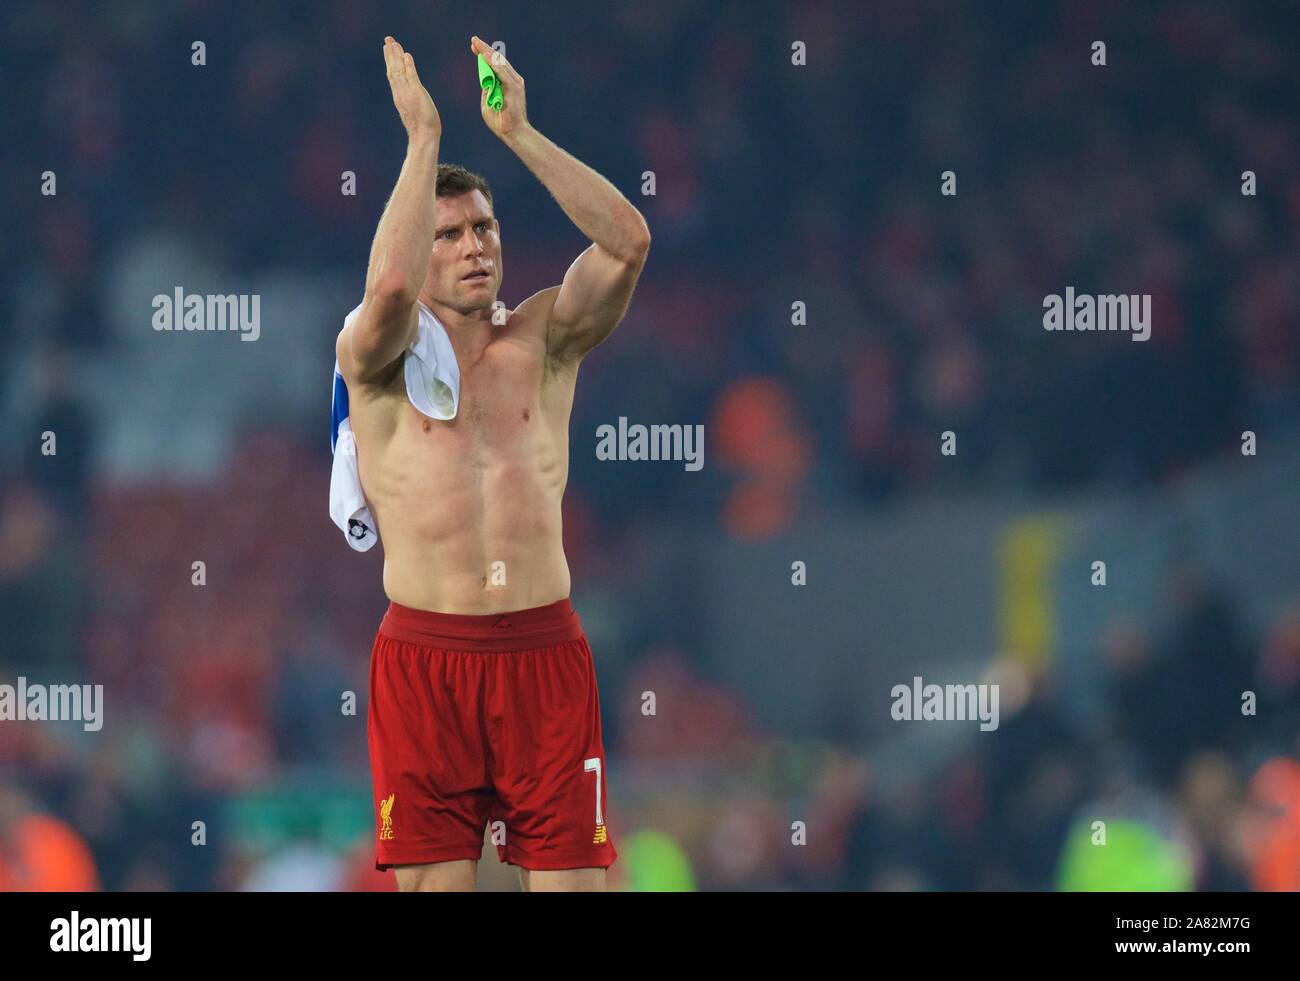 Liverpool. 6th Nov, 2019. Liverpool's James Milner applauds the supporters after the UEFA Champions League Group E match soccer between Liverpool FC and KRC Genk at Anfield in Liverpool, Britain on Nov. 5, 2019. Credit: Xinhua/Alamy Live News Stock Photo